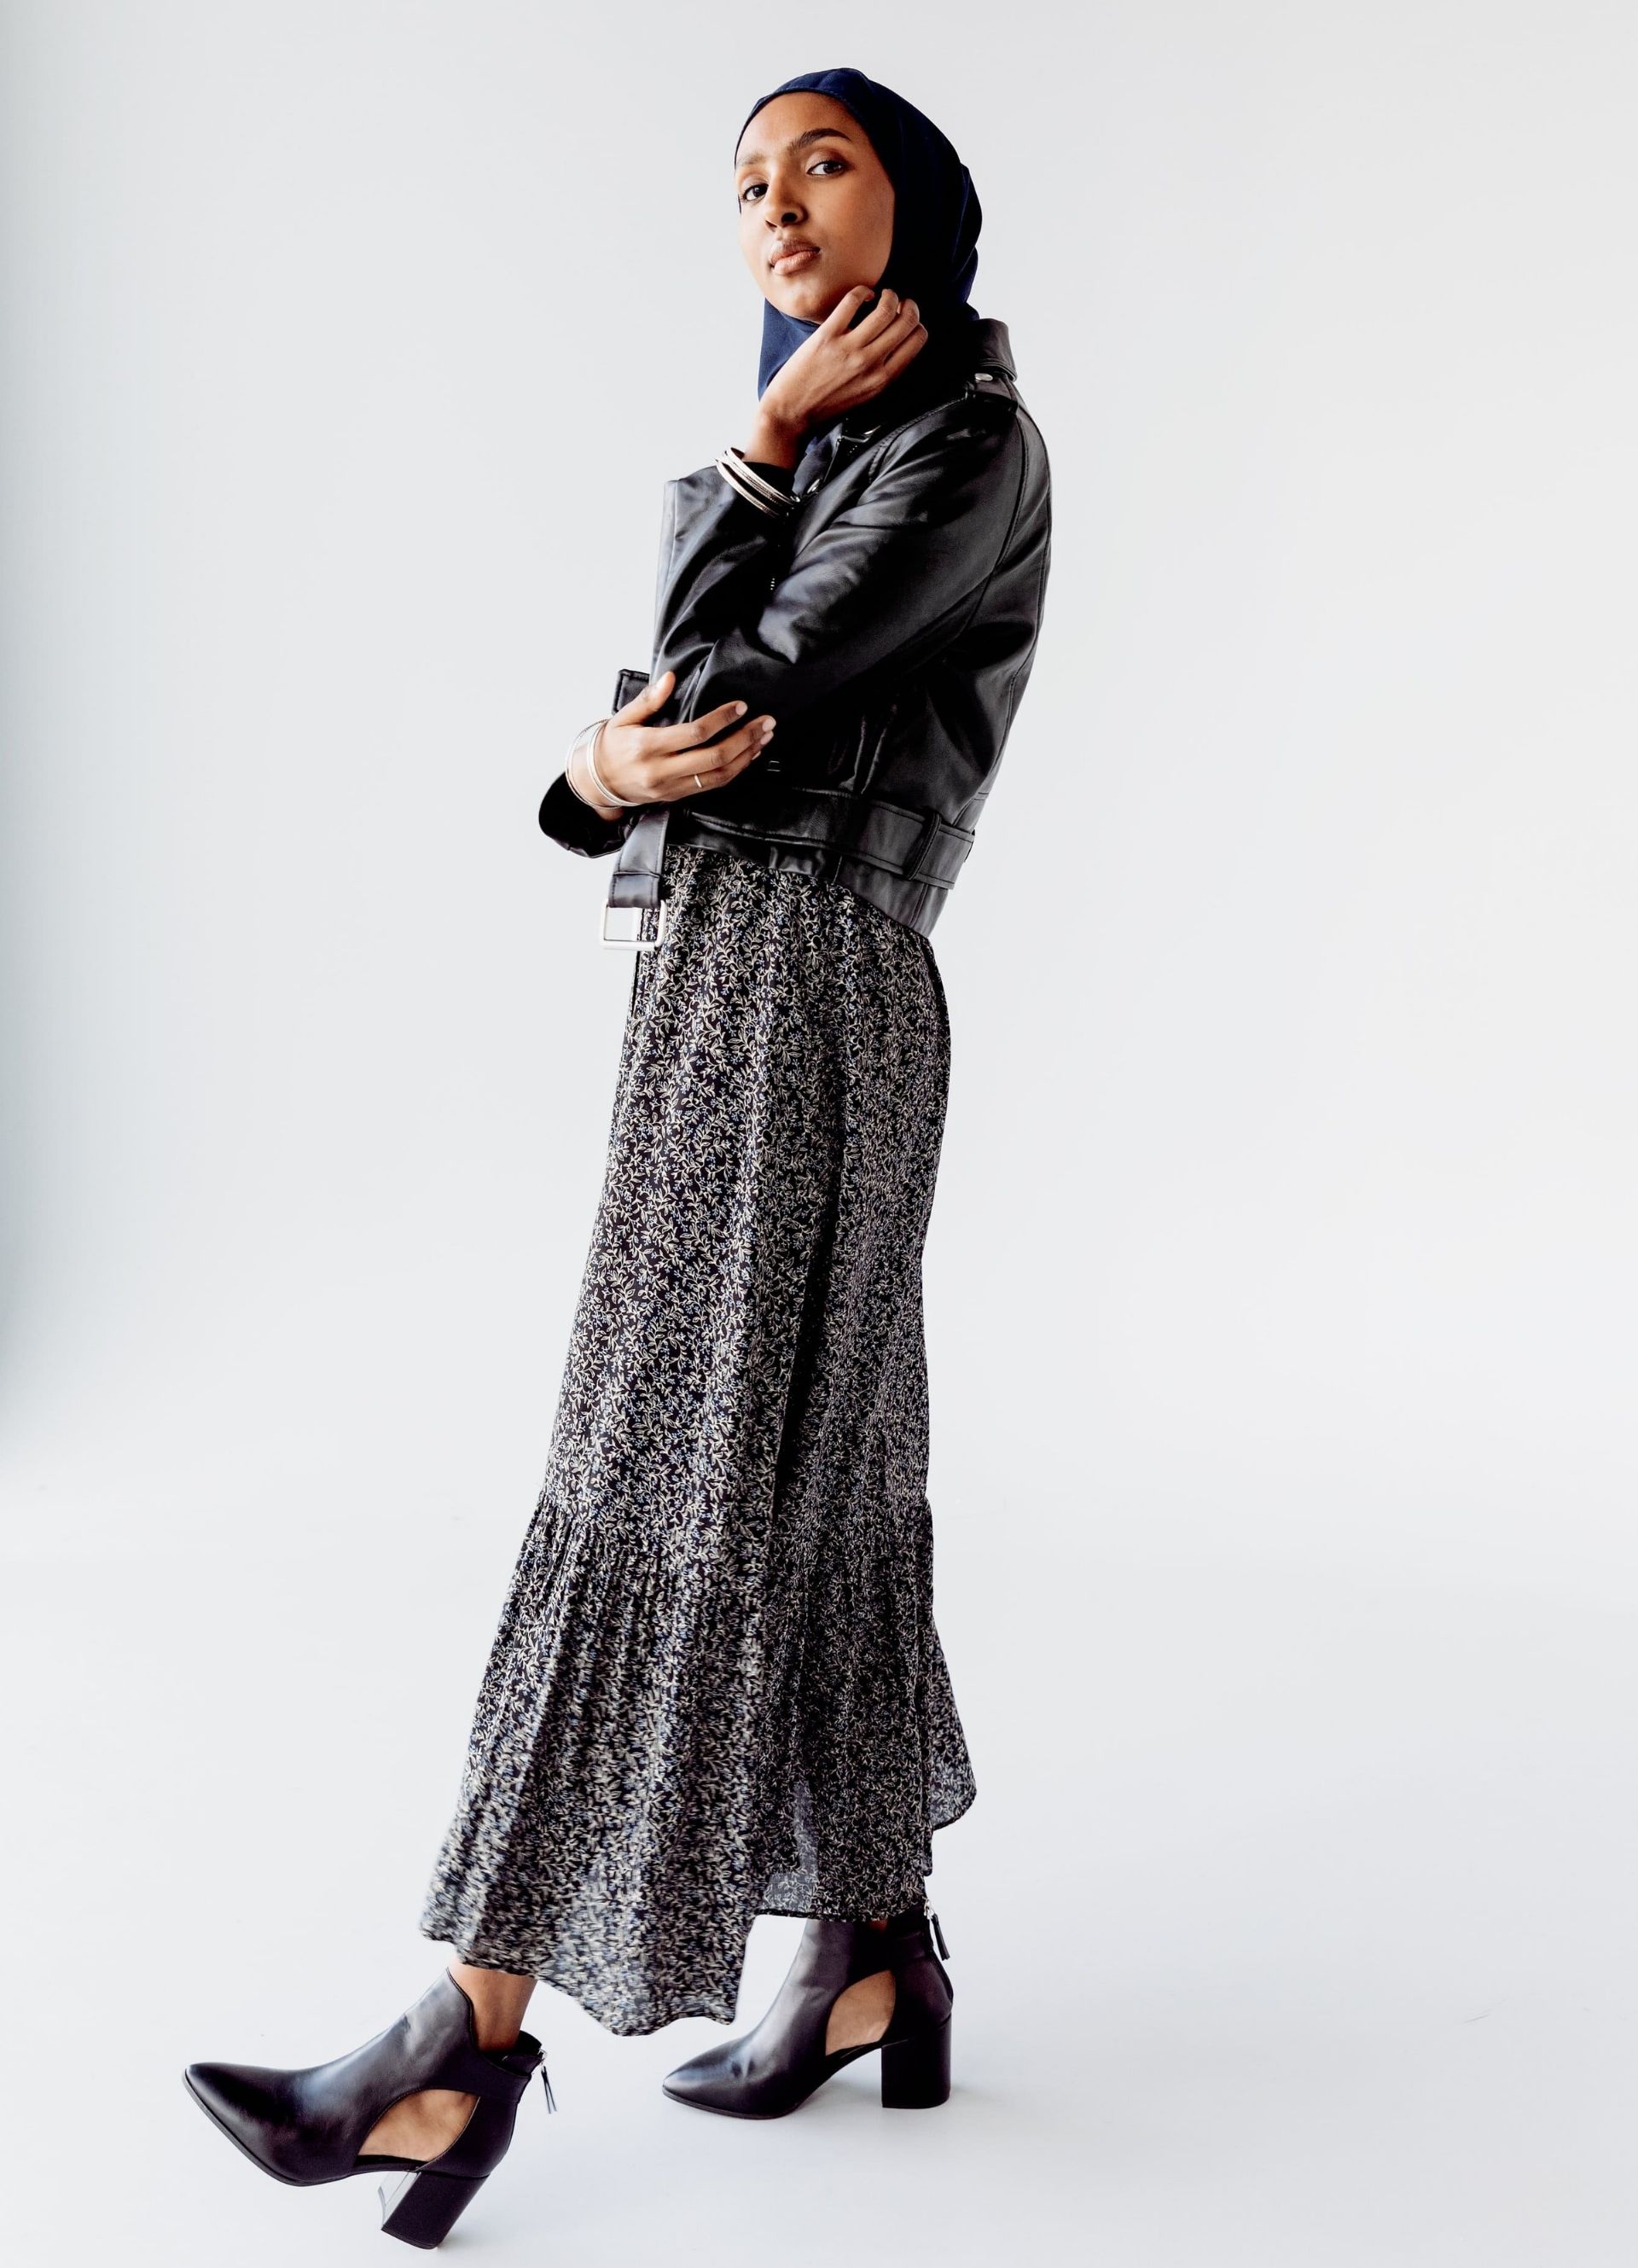 Pleated and textured skirts for AW21. Photo by Sarah Pflug, Burst by Shopify 